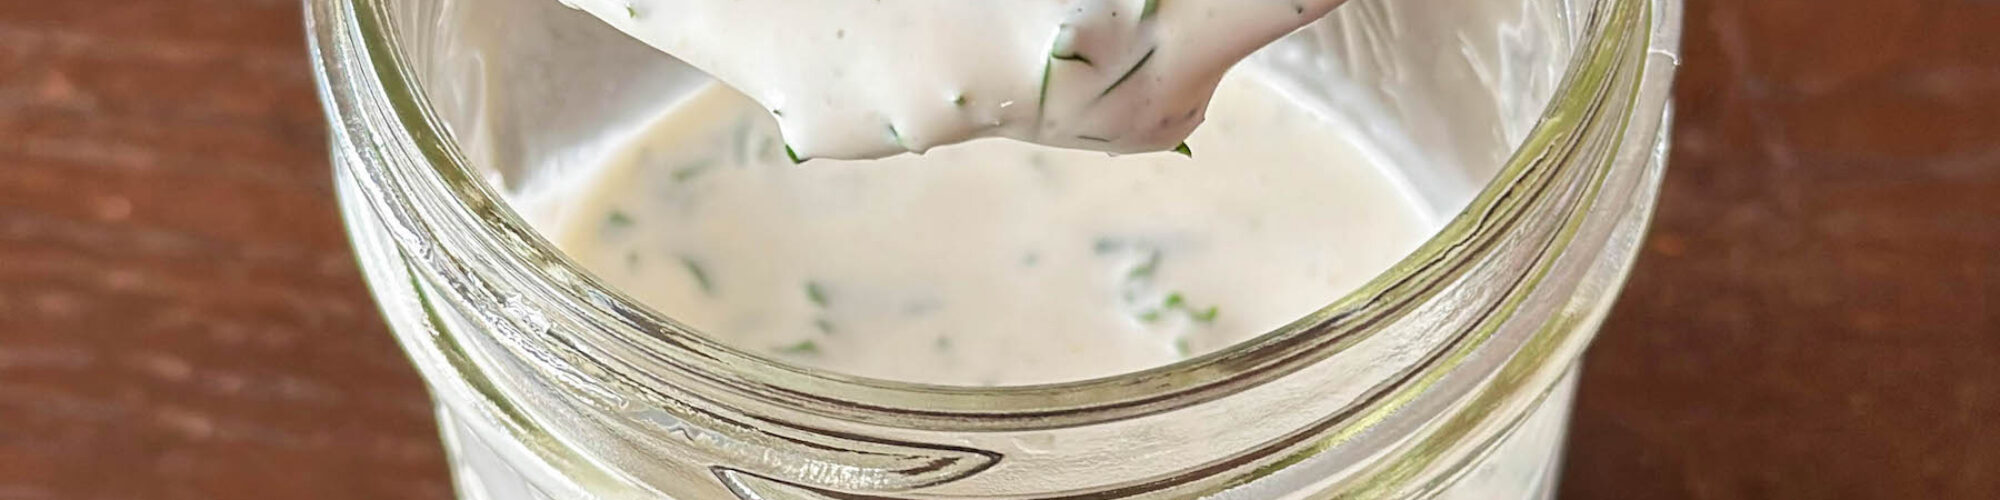 creamy ranch sauce with fresh herbs